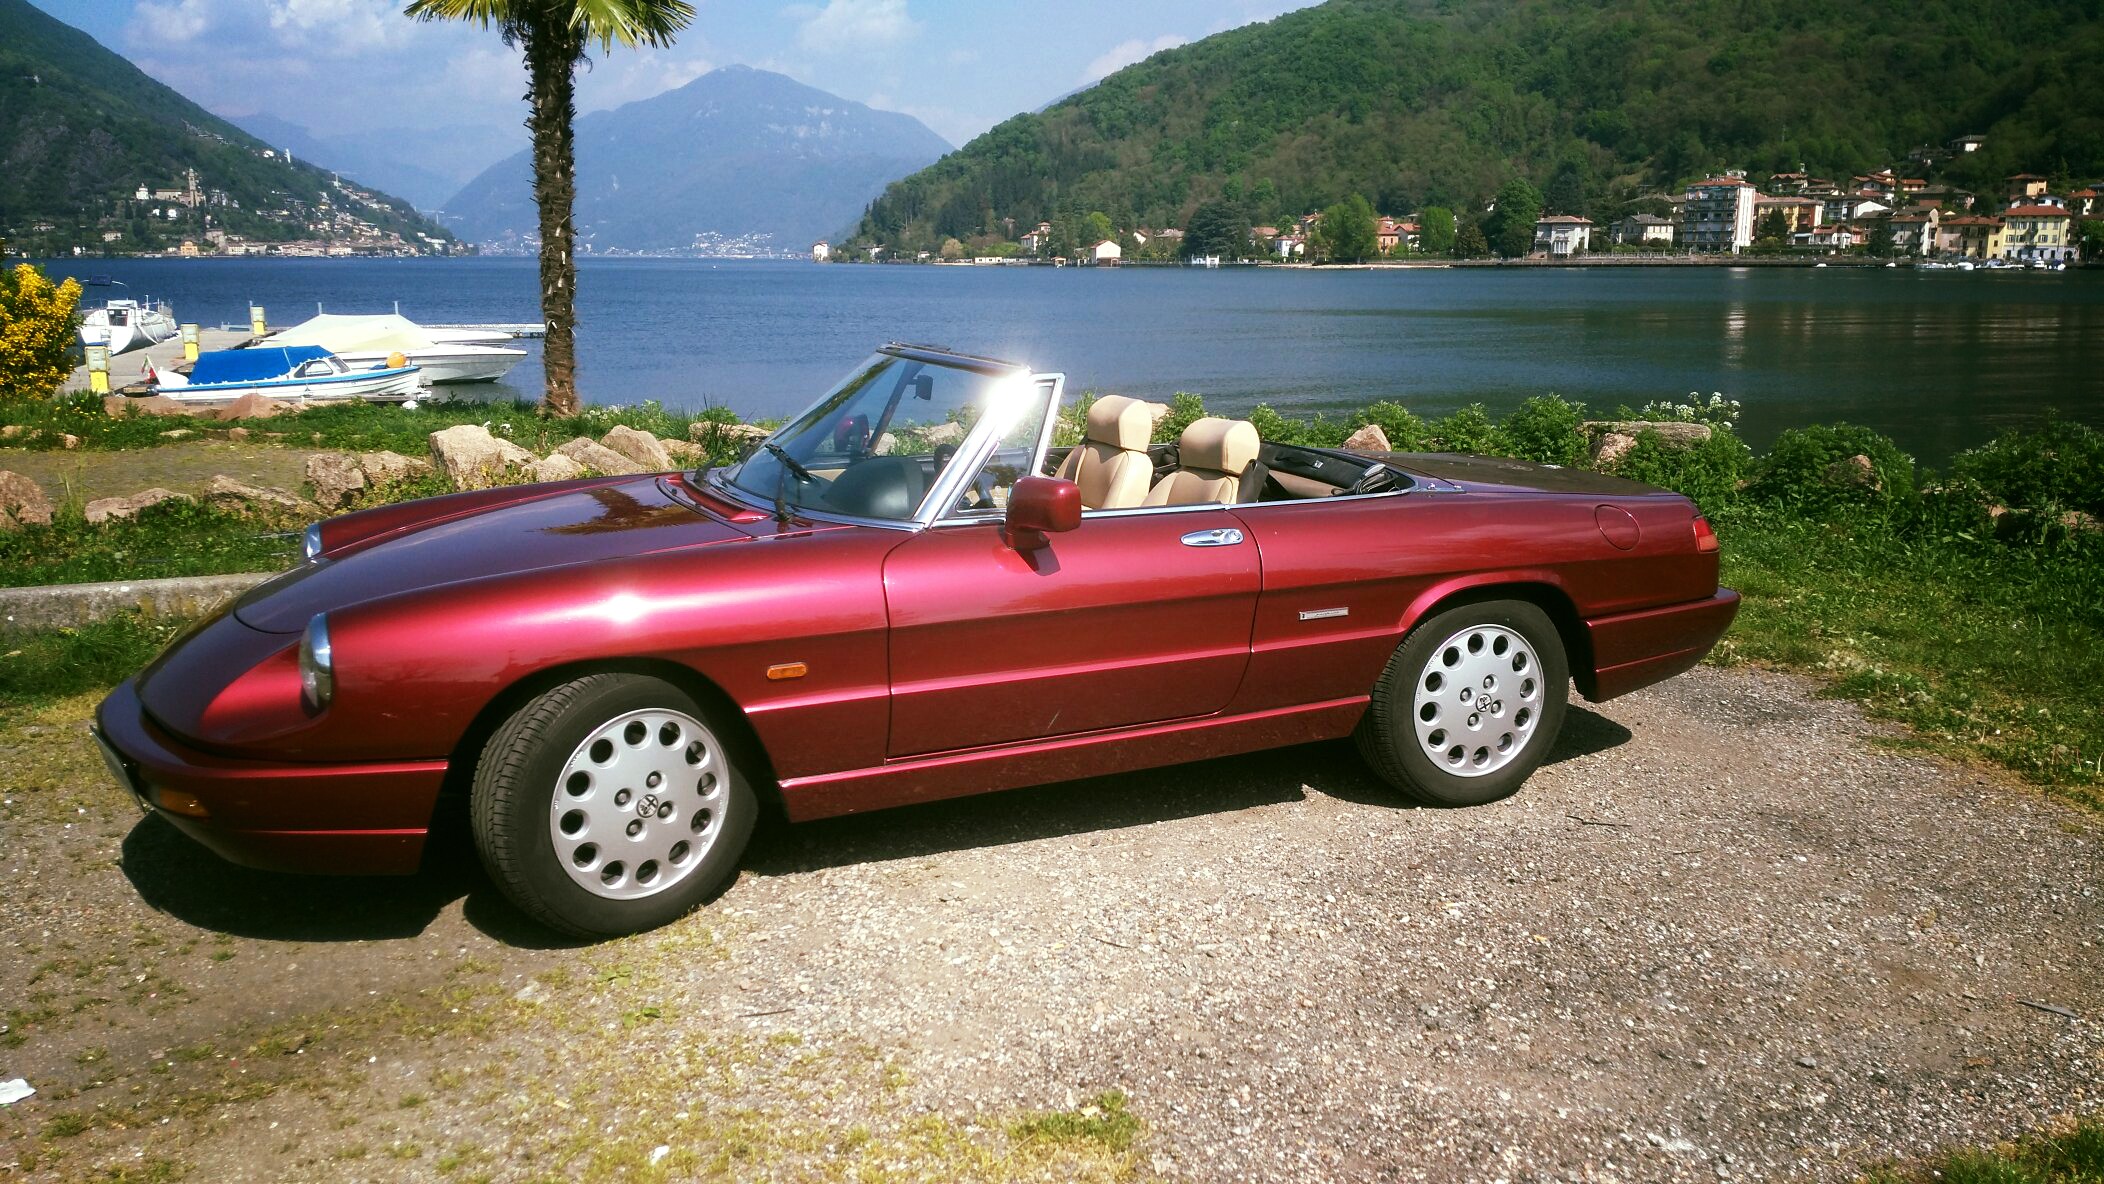 Classic Rental Cars: The Finest Way To Drive in Italy.